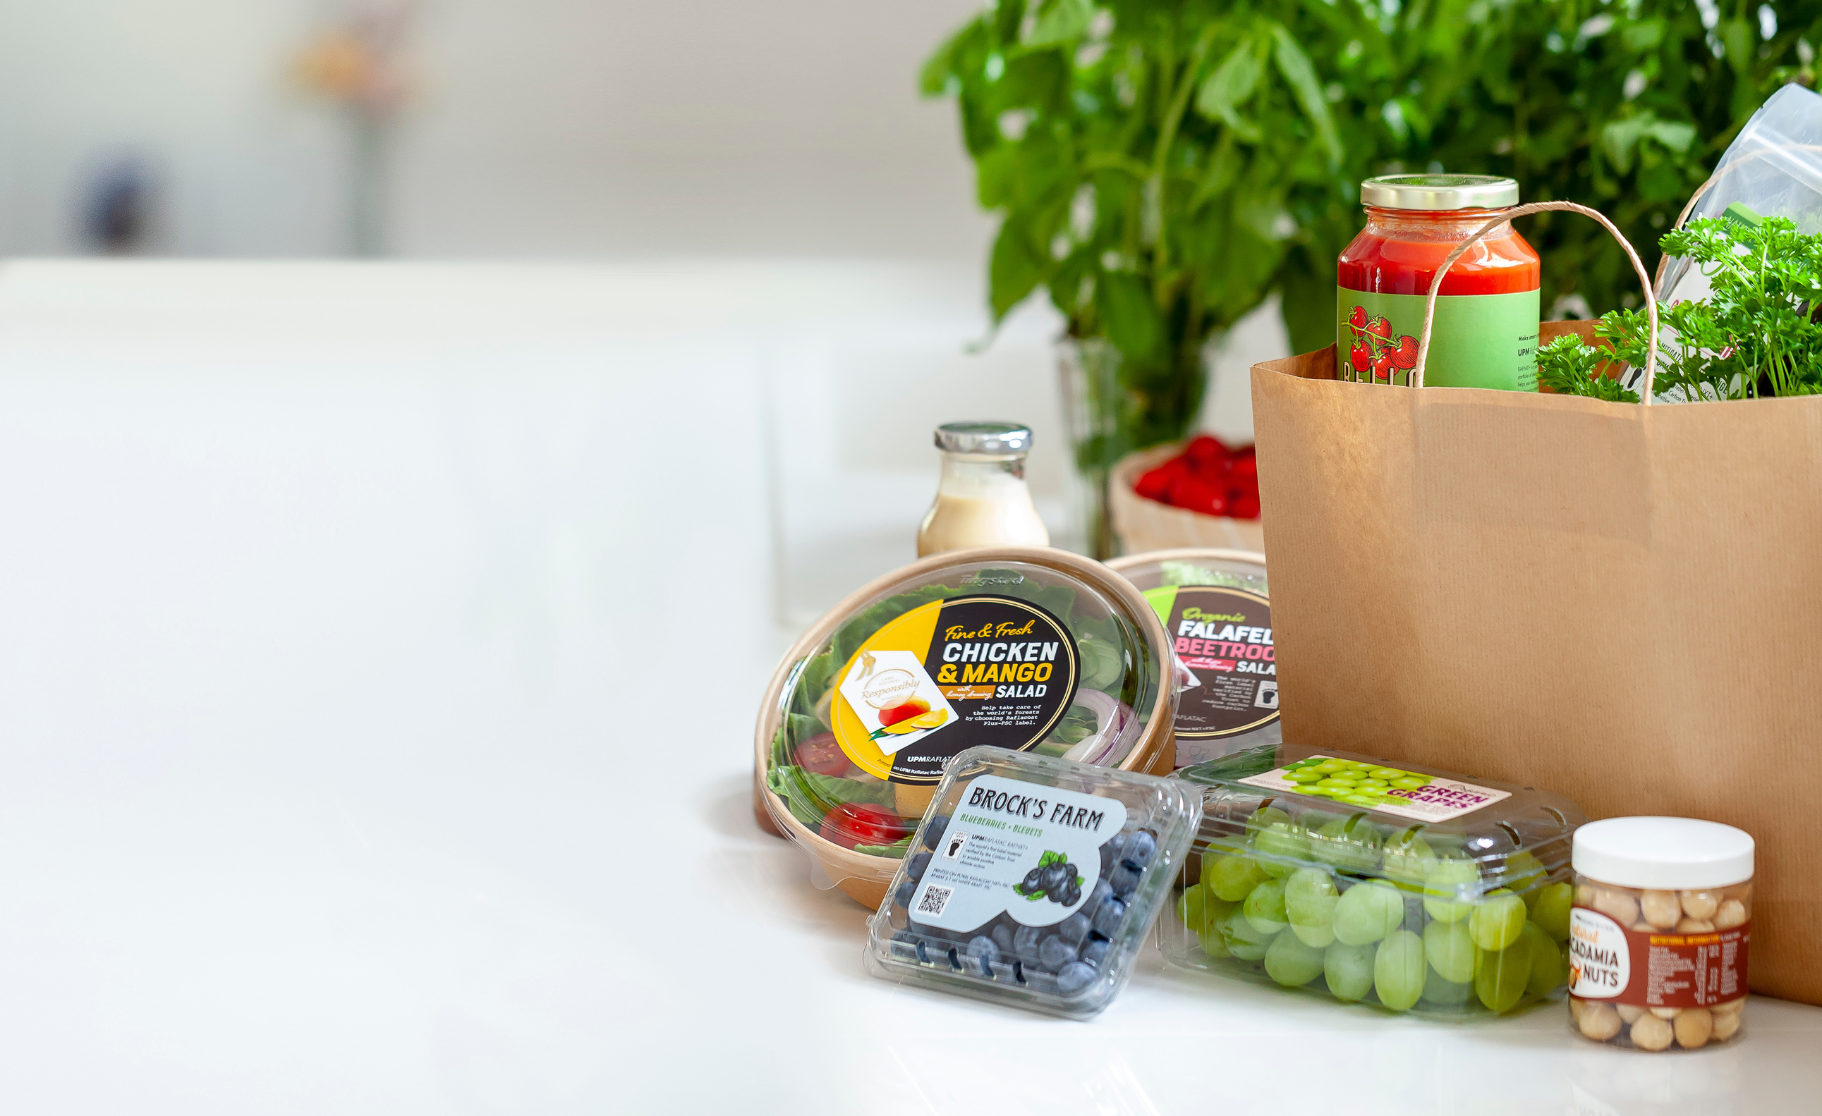 UPM Food packaging with the Carbon Trust footprint label